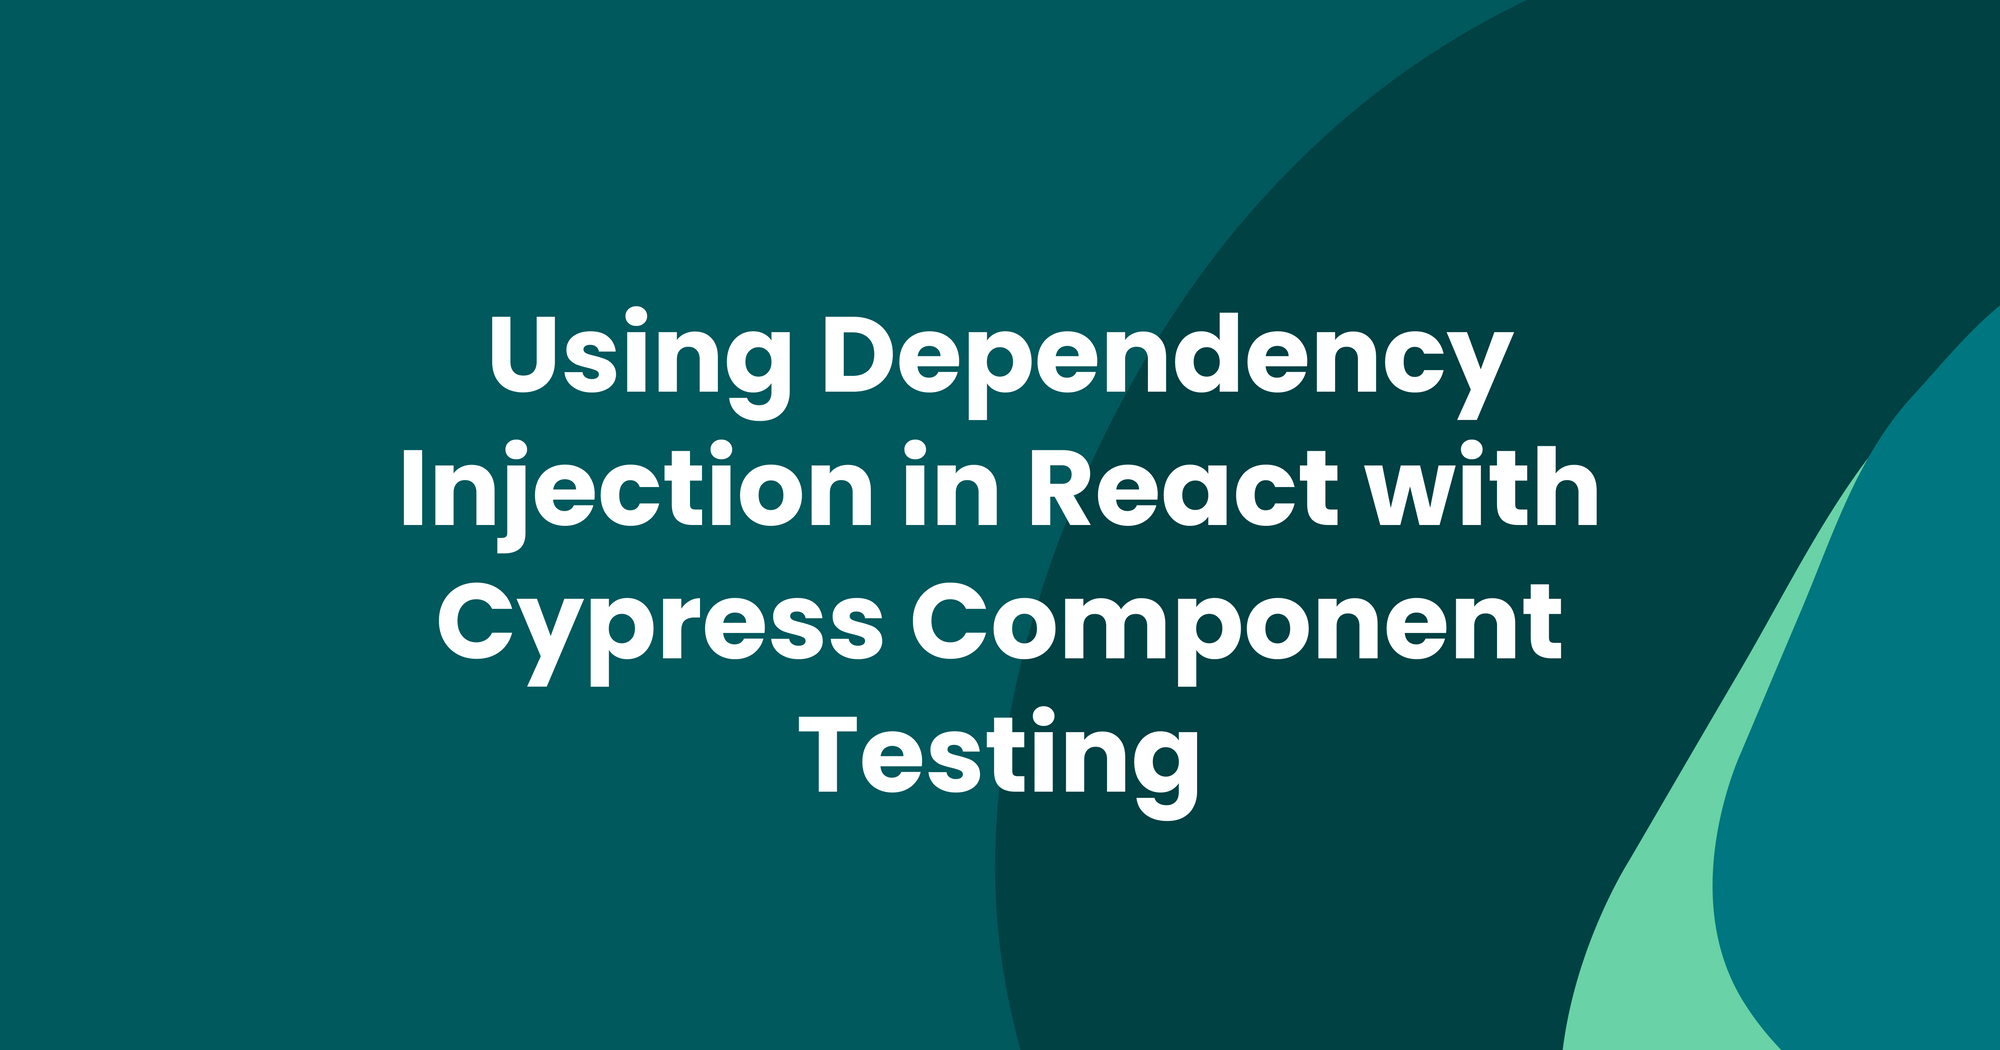 Using dependency injection in react with Cypress Component Testing